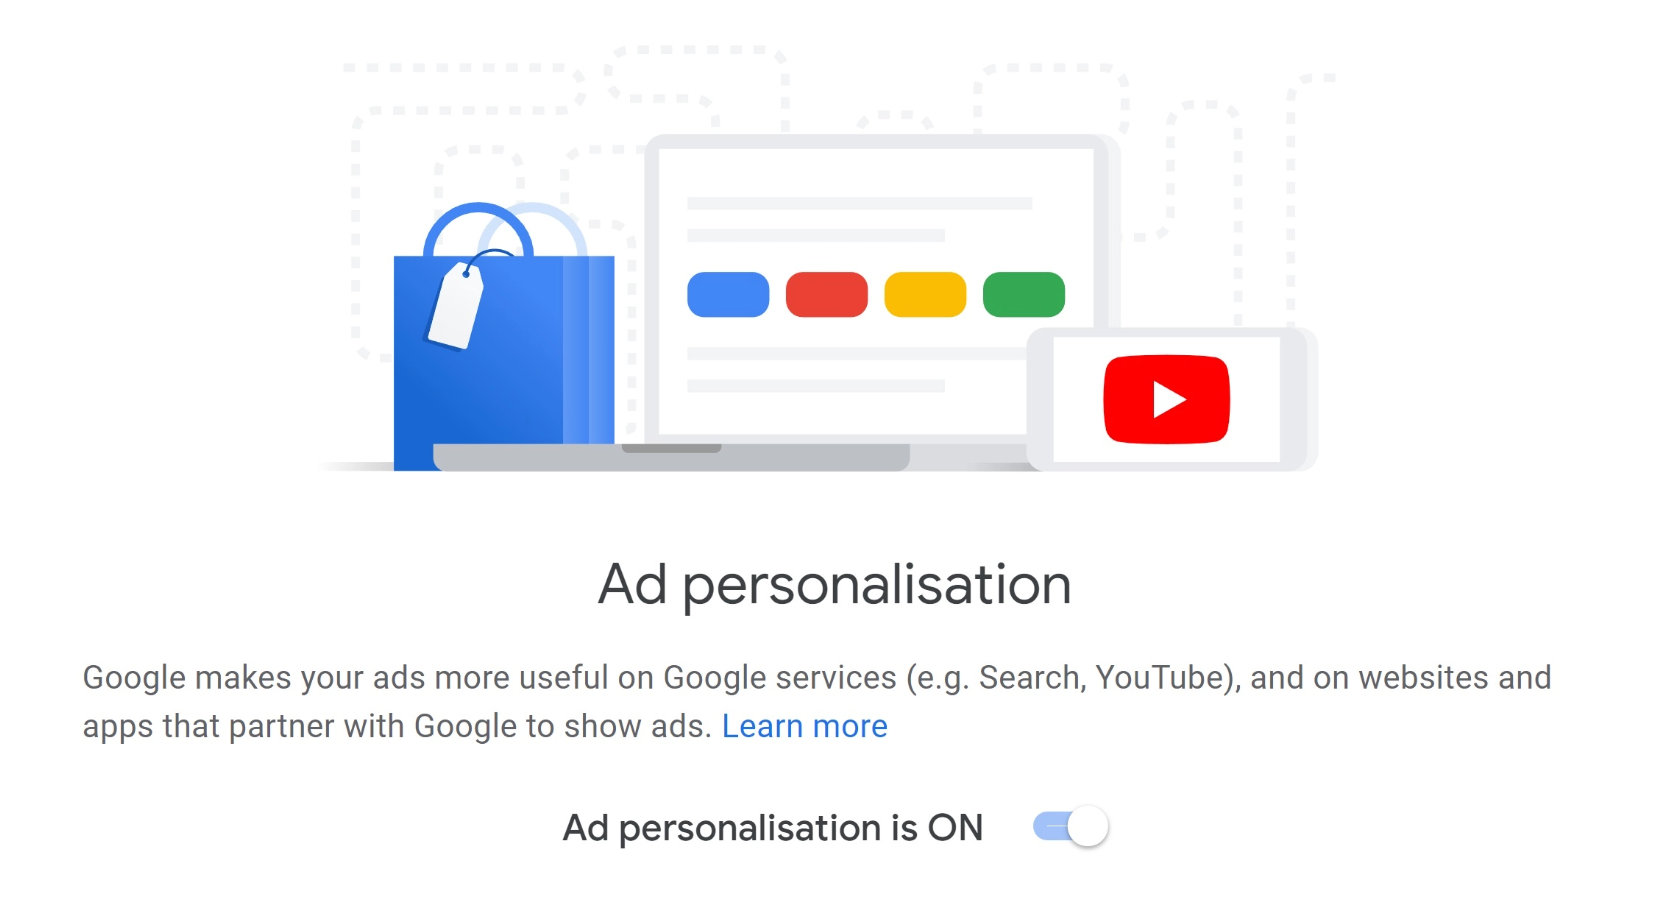 How to minimize and control Google’s Ad tracking  ?